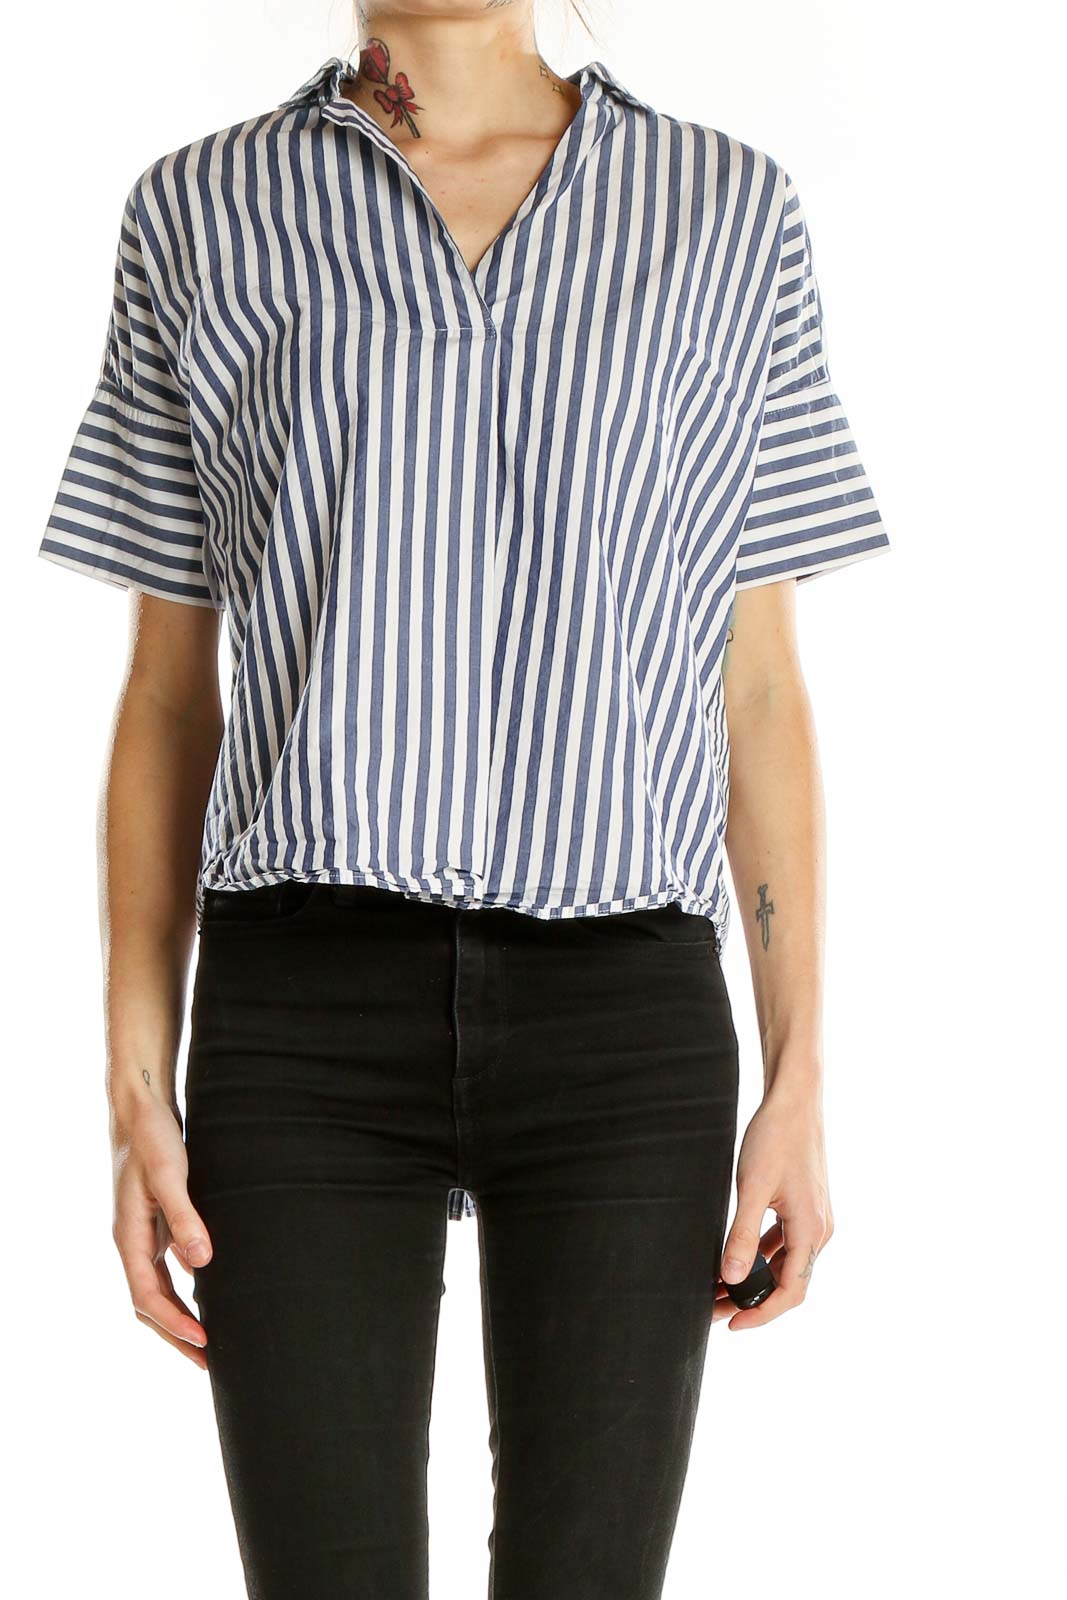 White Blue Collared Shorts Sleeve Striped Top Front